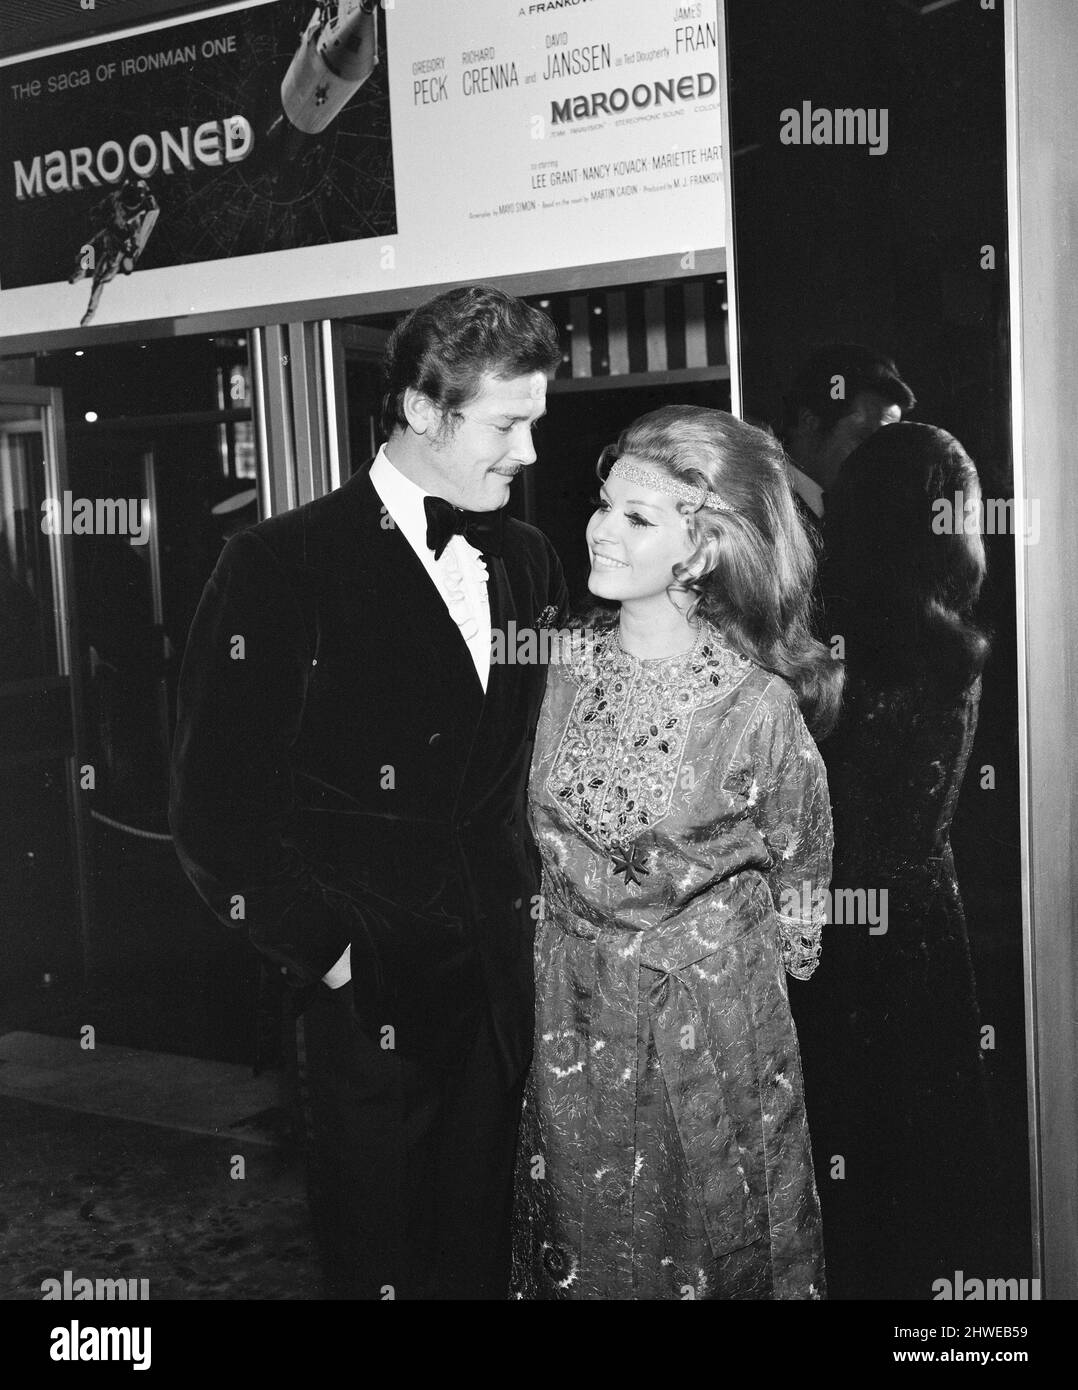 Marooned 1970 Film Premiere, The Odeon, Leicester Square, London ...